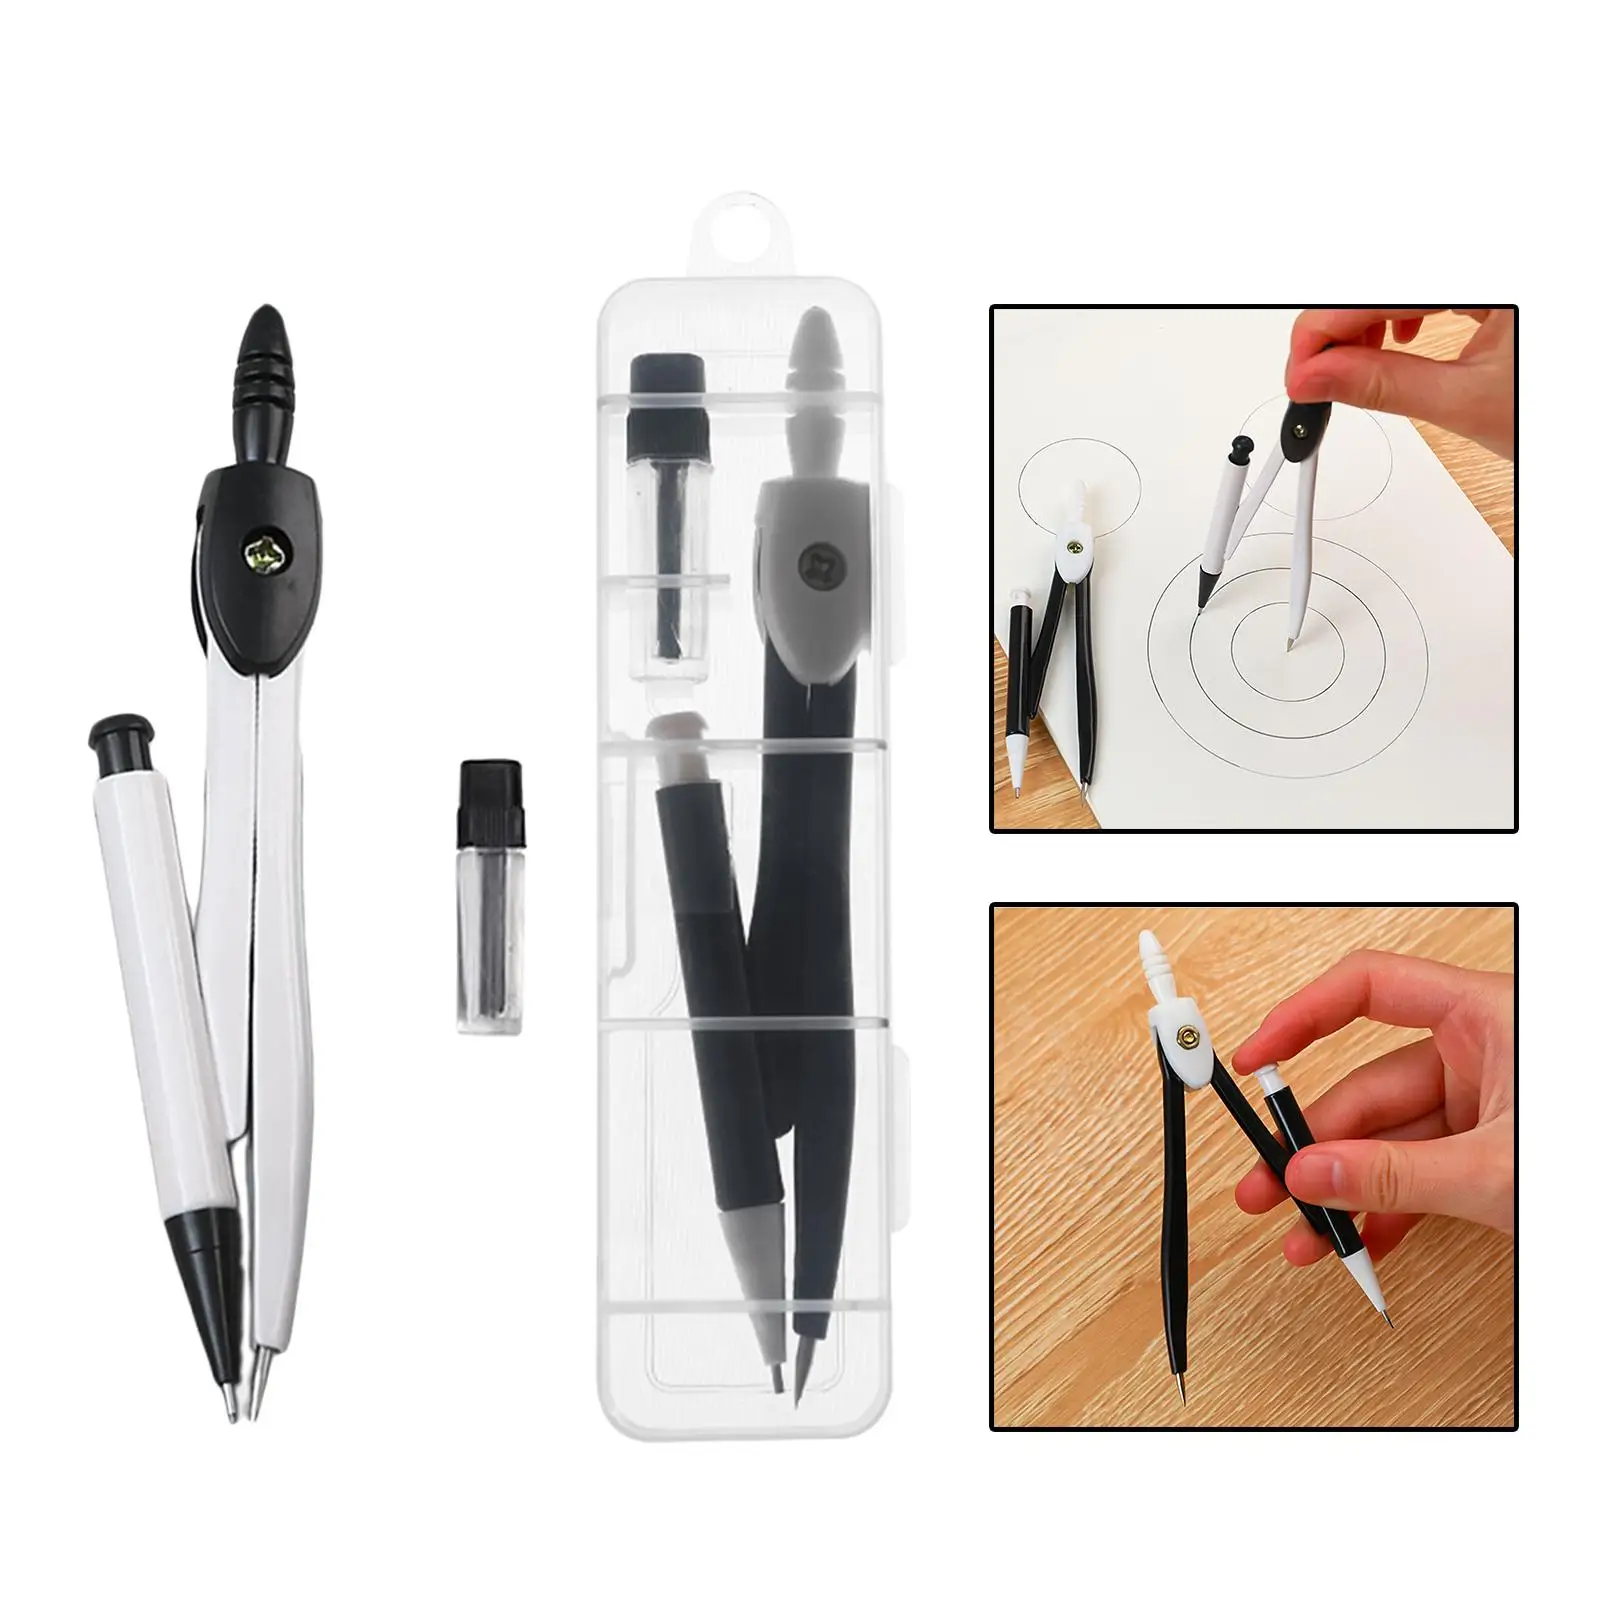 Professional Metal Compasses with Storage Case Mechanical Pencil with Refill for School Office Stationery Supplies